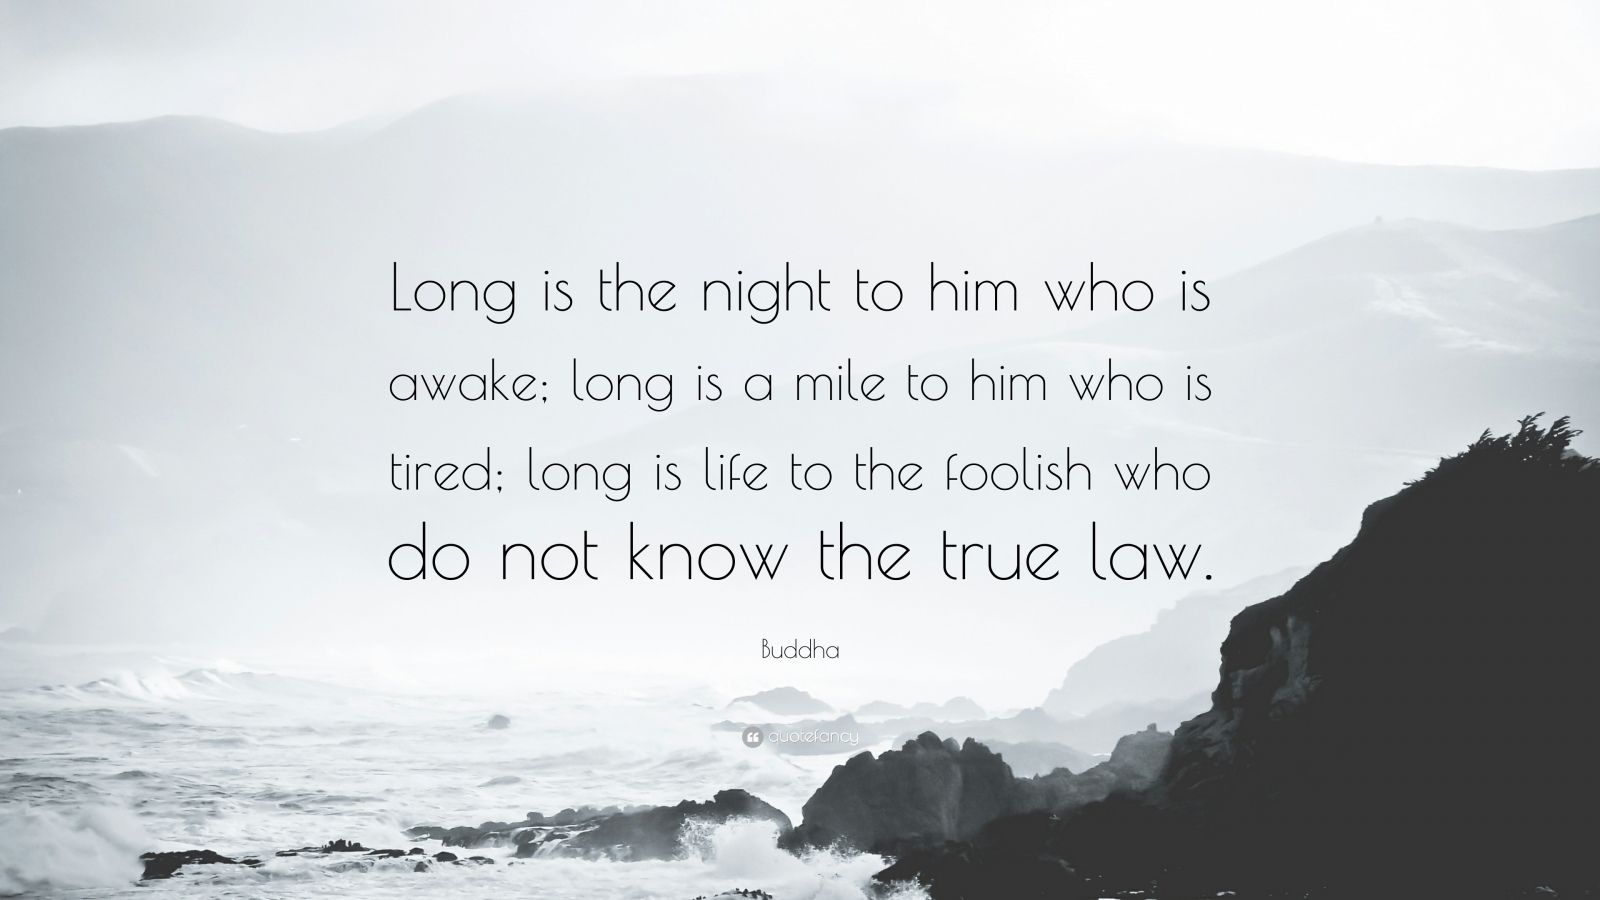 Buddha Quote “Long is the night to him who is awake long is